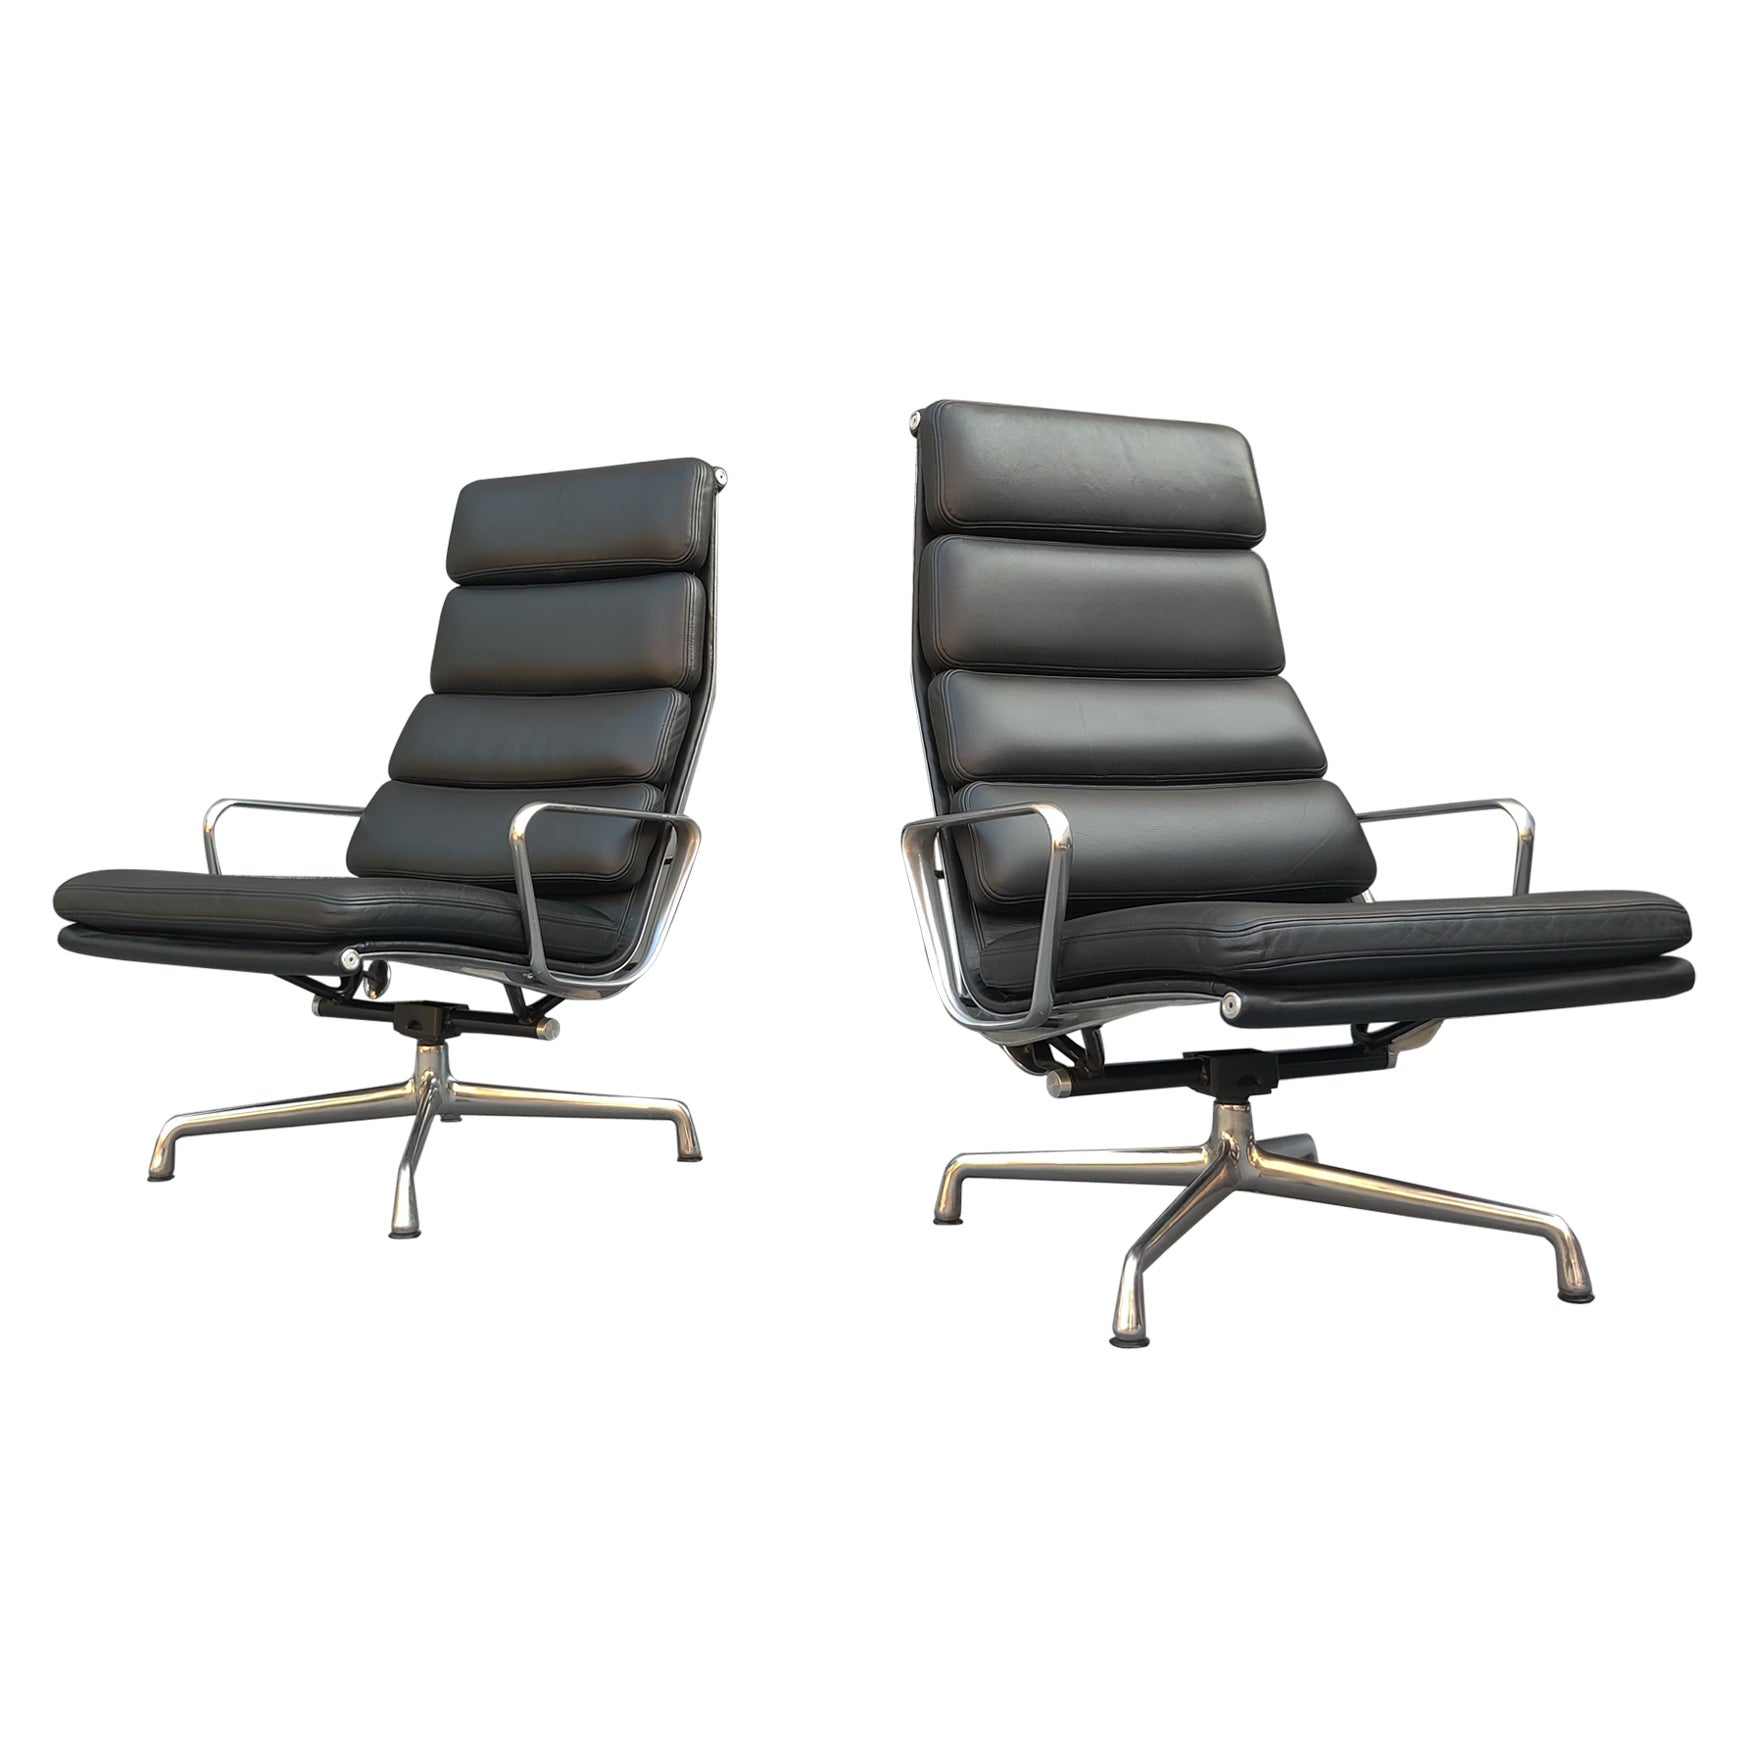 Pair of Charles & Ray Eames Herman Miller Black Leather "Soft Pad" Lounge Chairs